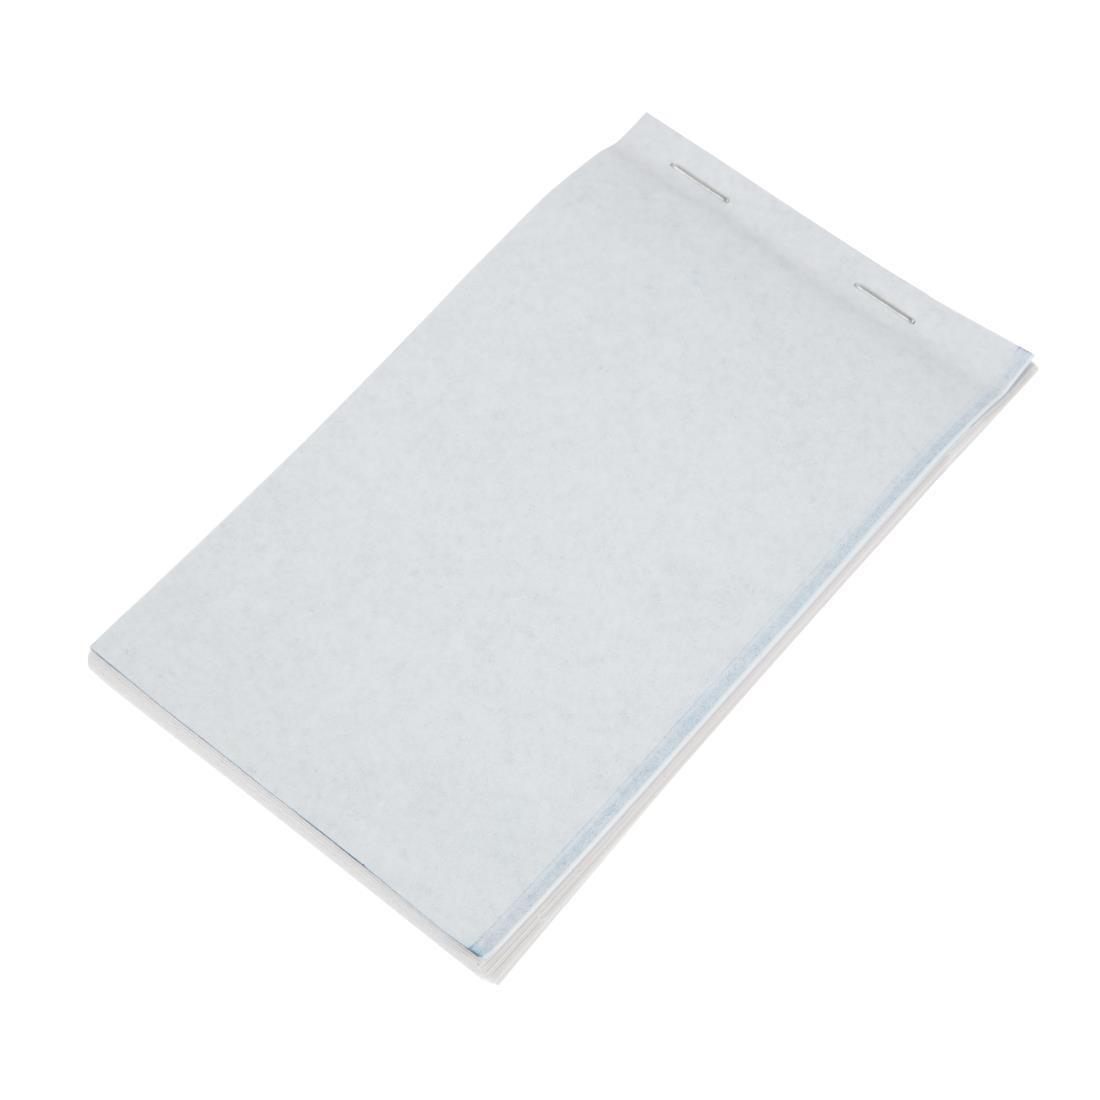 Restaurant Waiter Pads Duplicate Large (Pack of 50) - E168  - 1